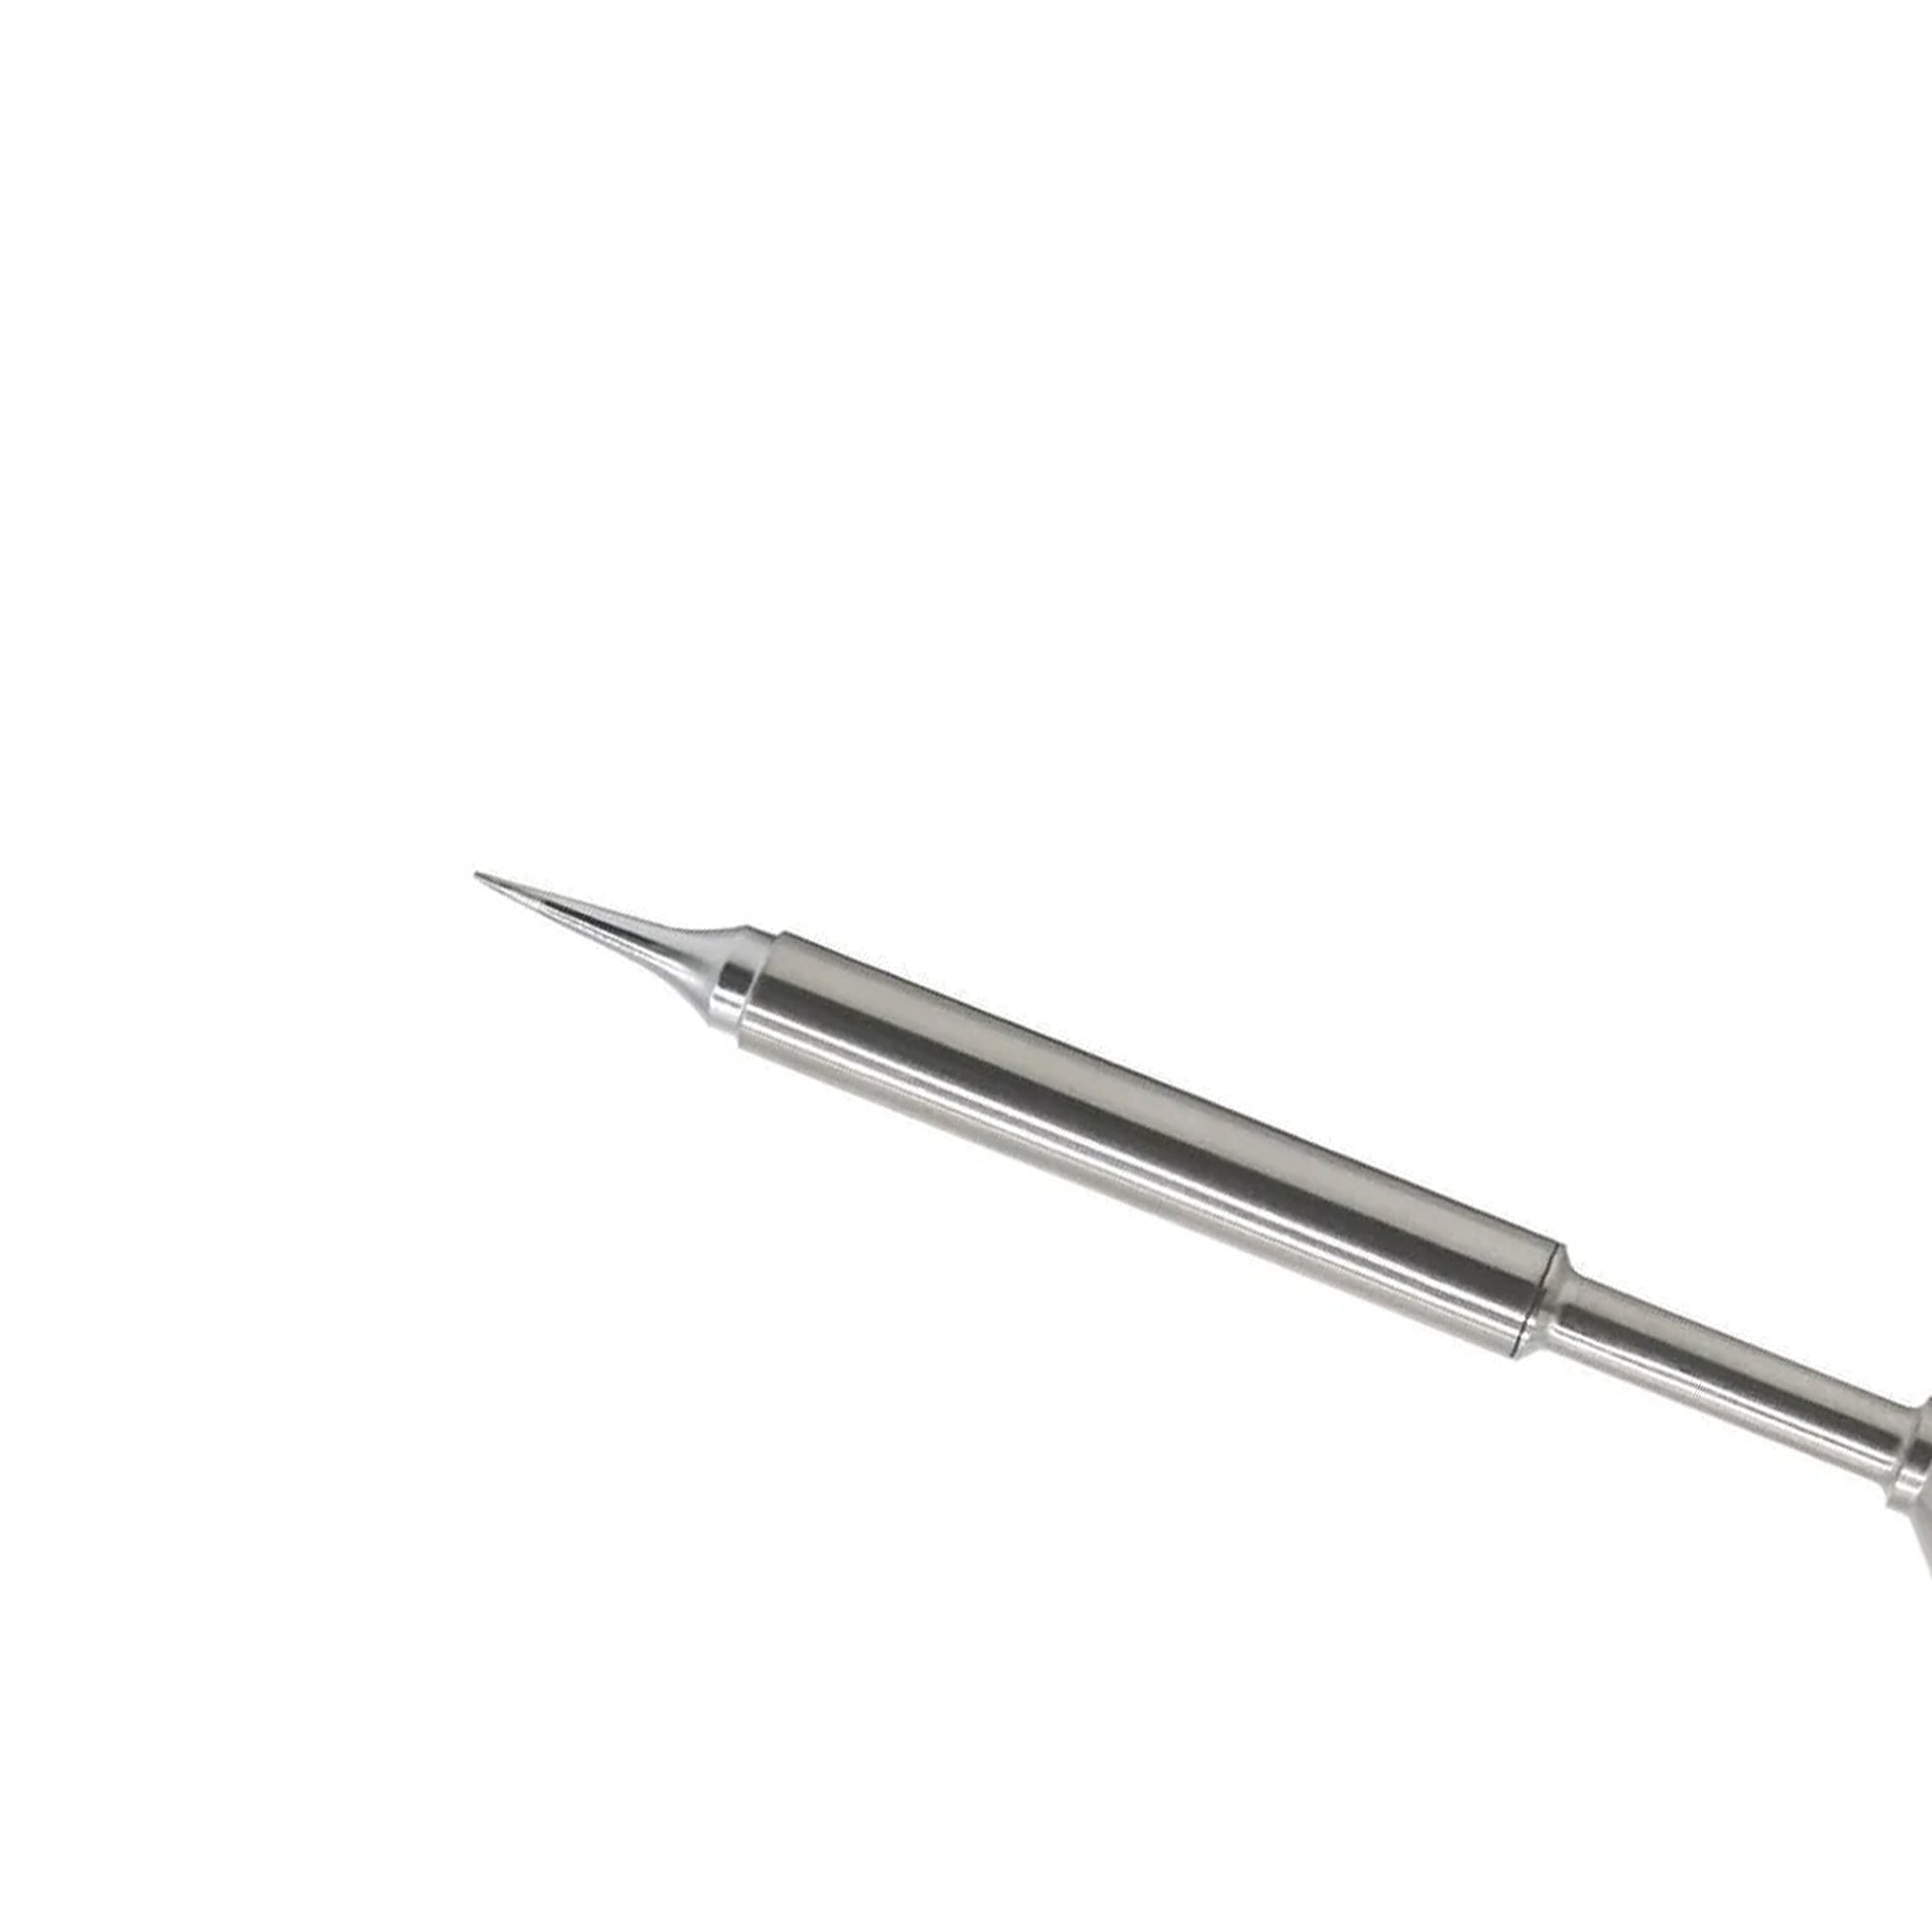 ILS Soldering Tip T1 Series Replacement (Compatible with TS100/TS101/Pinecil)